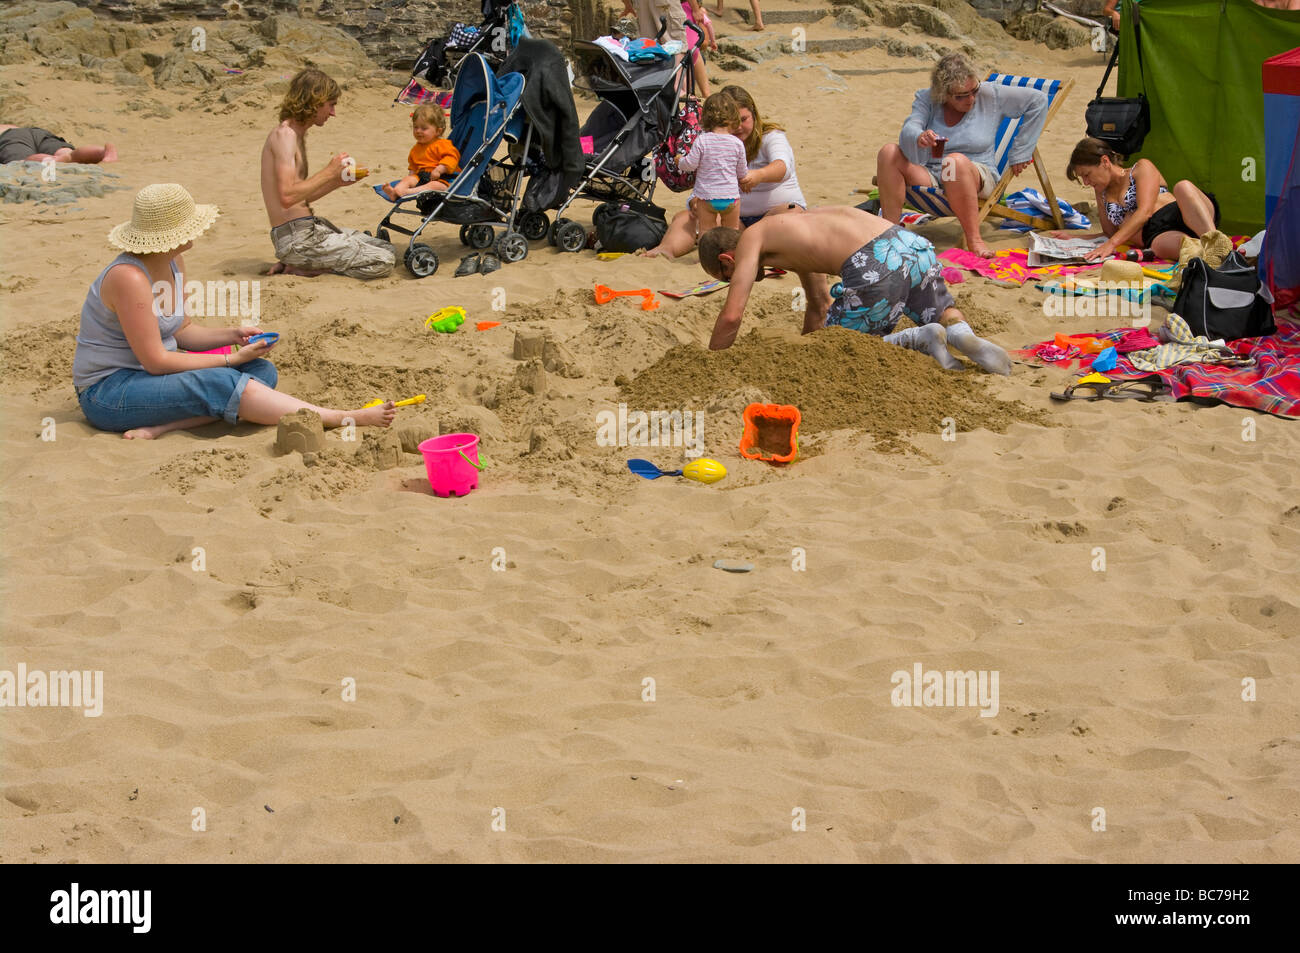 A Family Enjoying A Day At The Seaside Family On The Beach UK Beaches Stock Photo